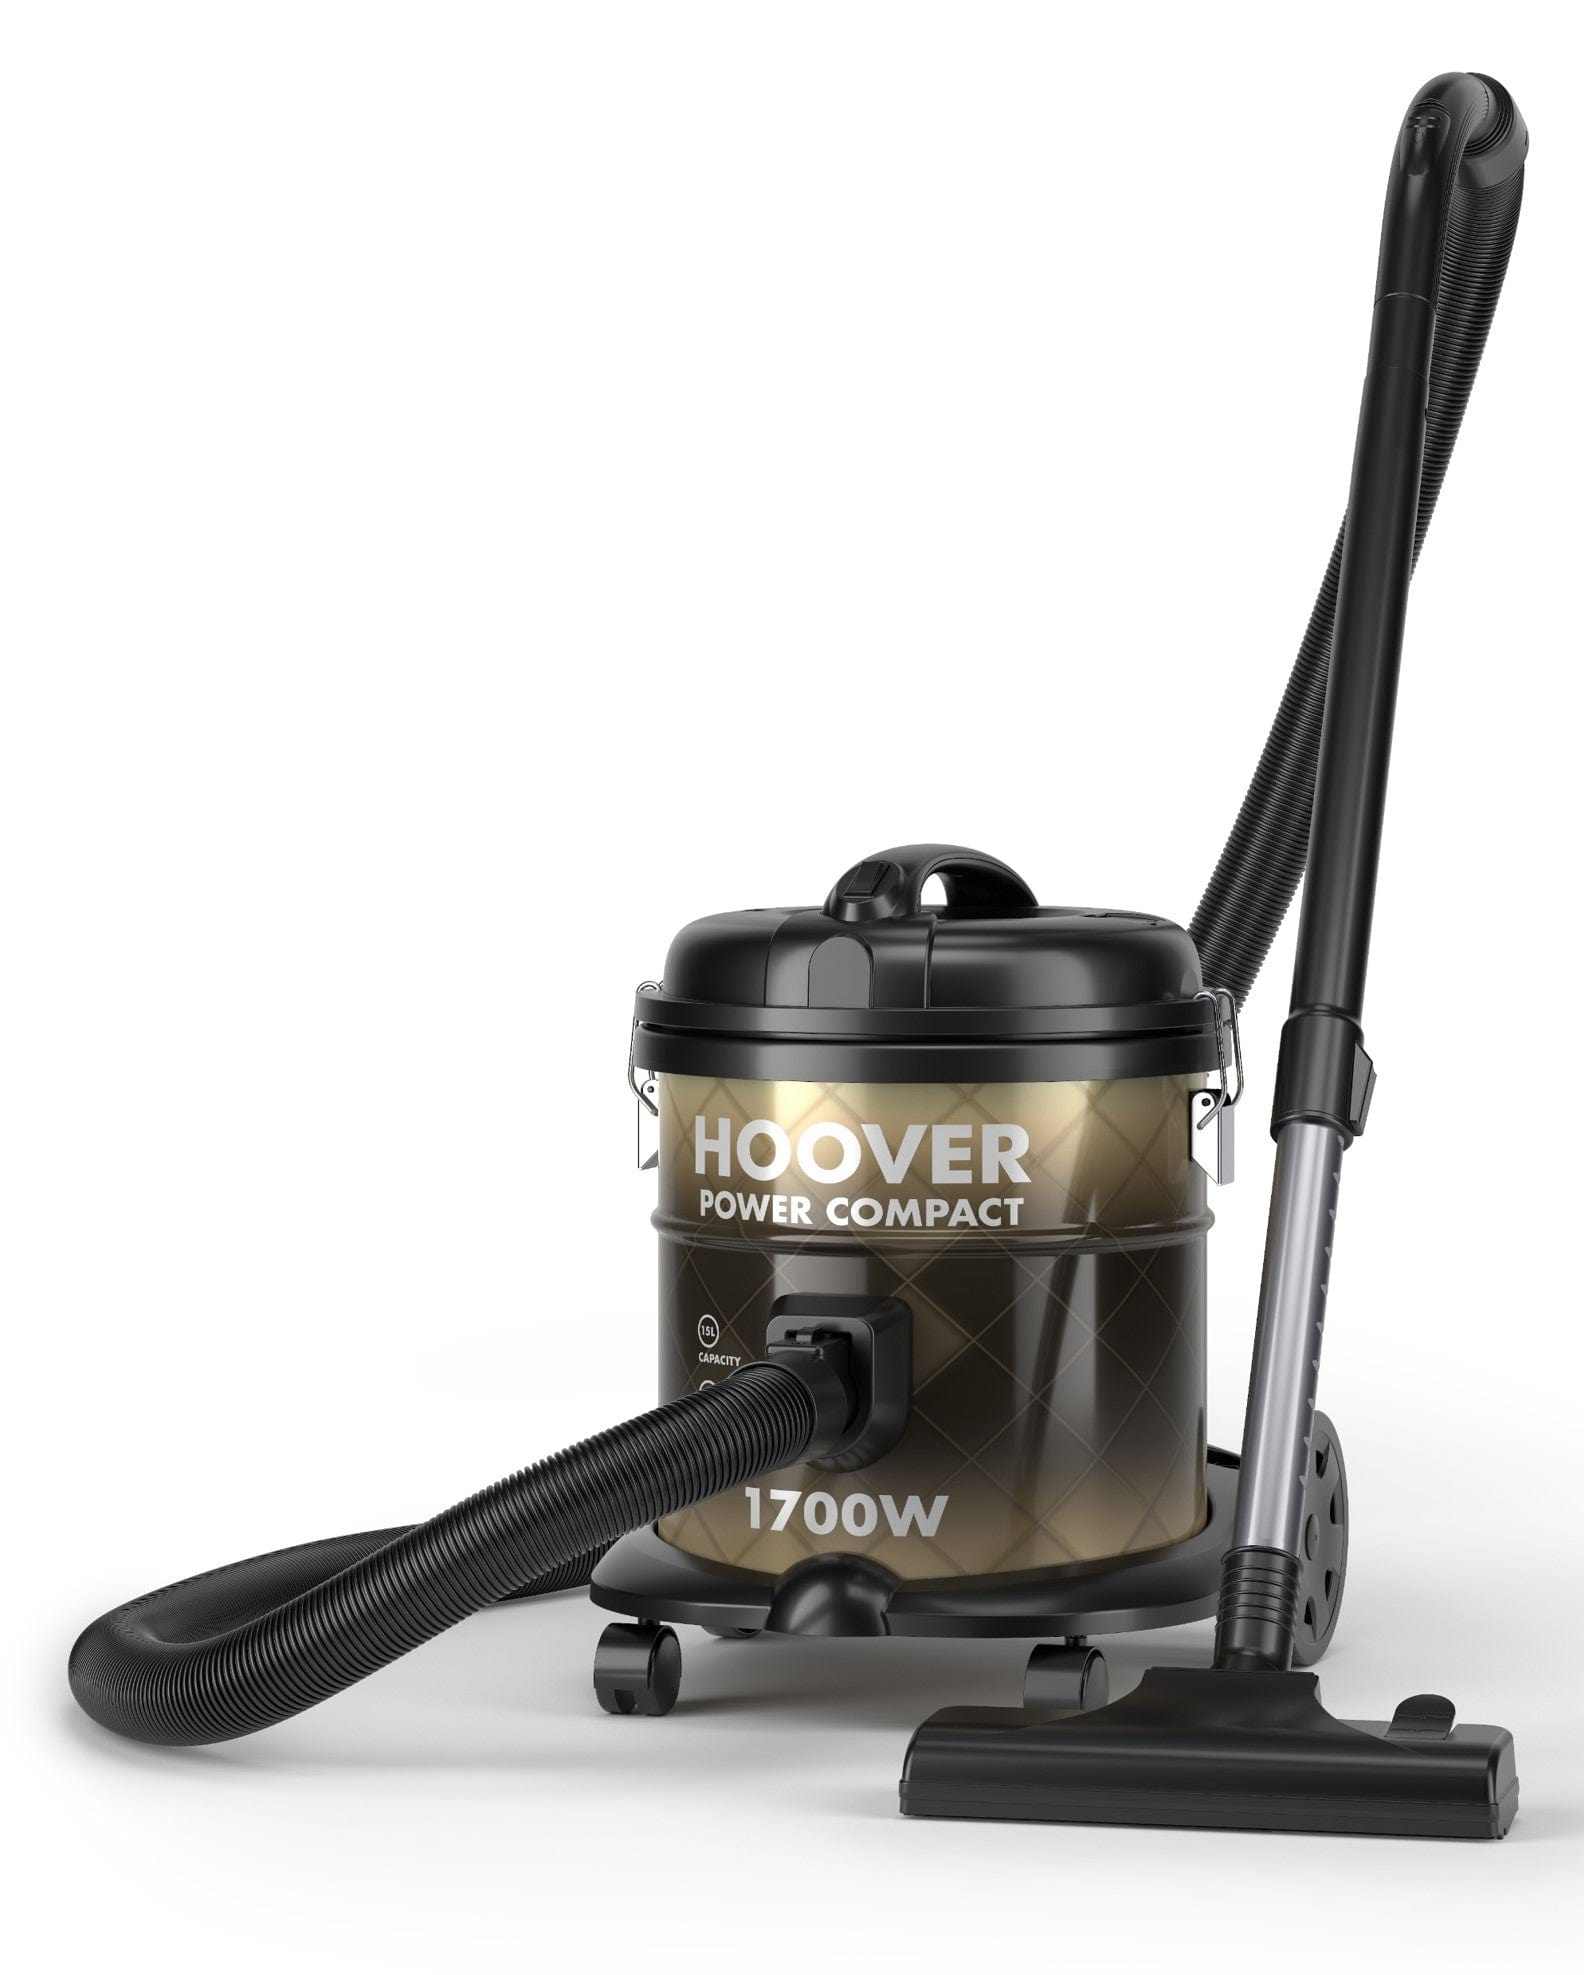 HOOVER 1700W 15L POWER COMPACT TANK  -  BLOWER FUNCTION  GOLD